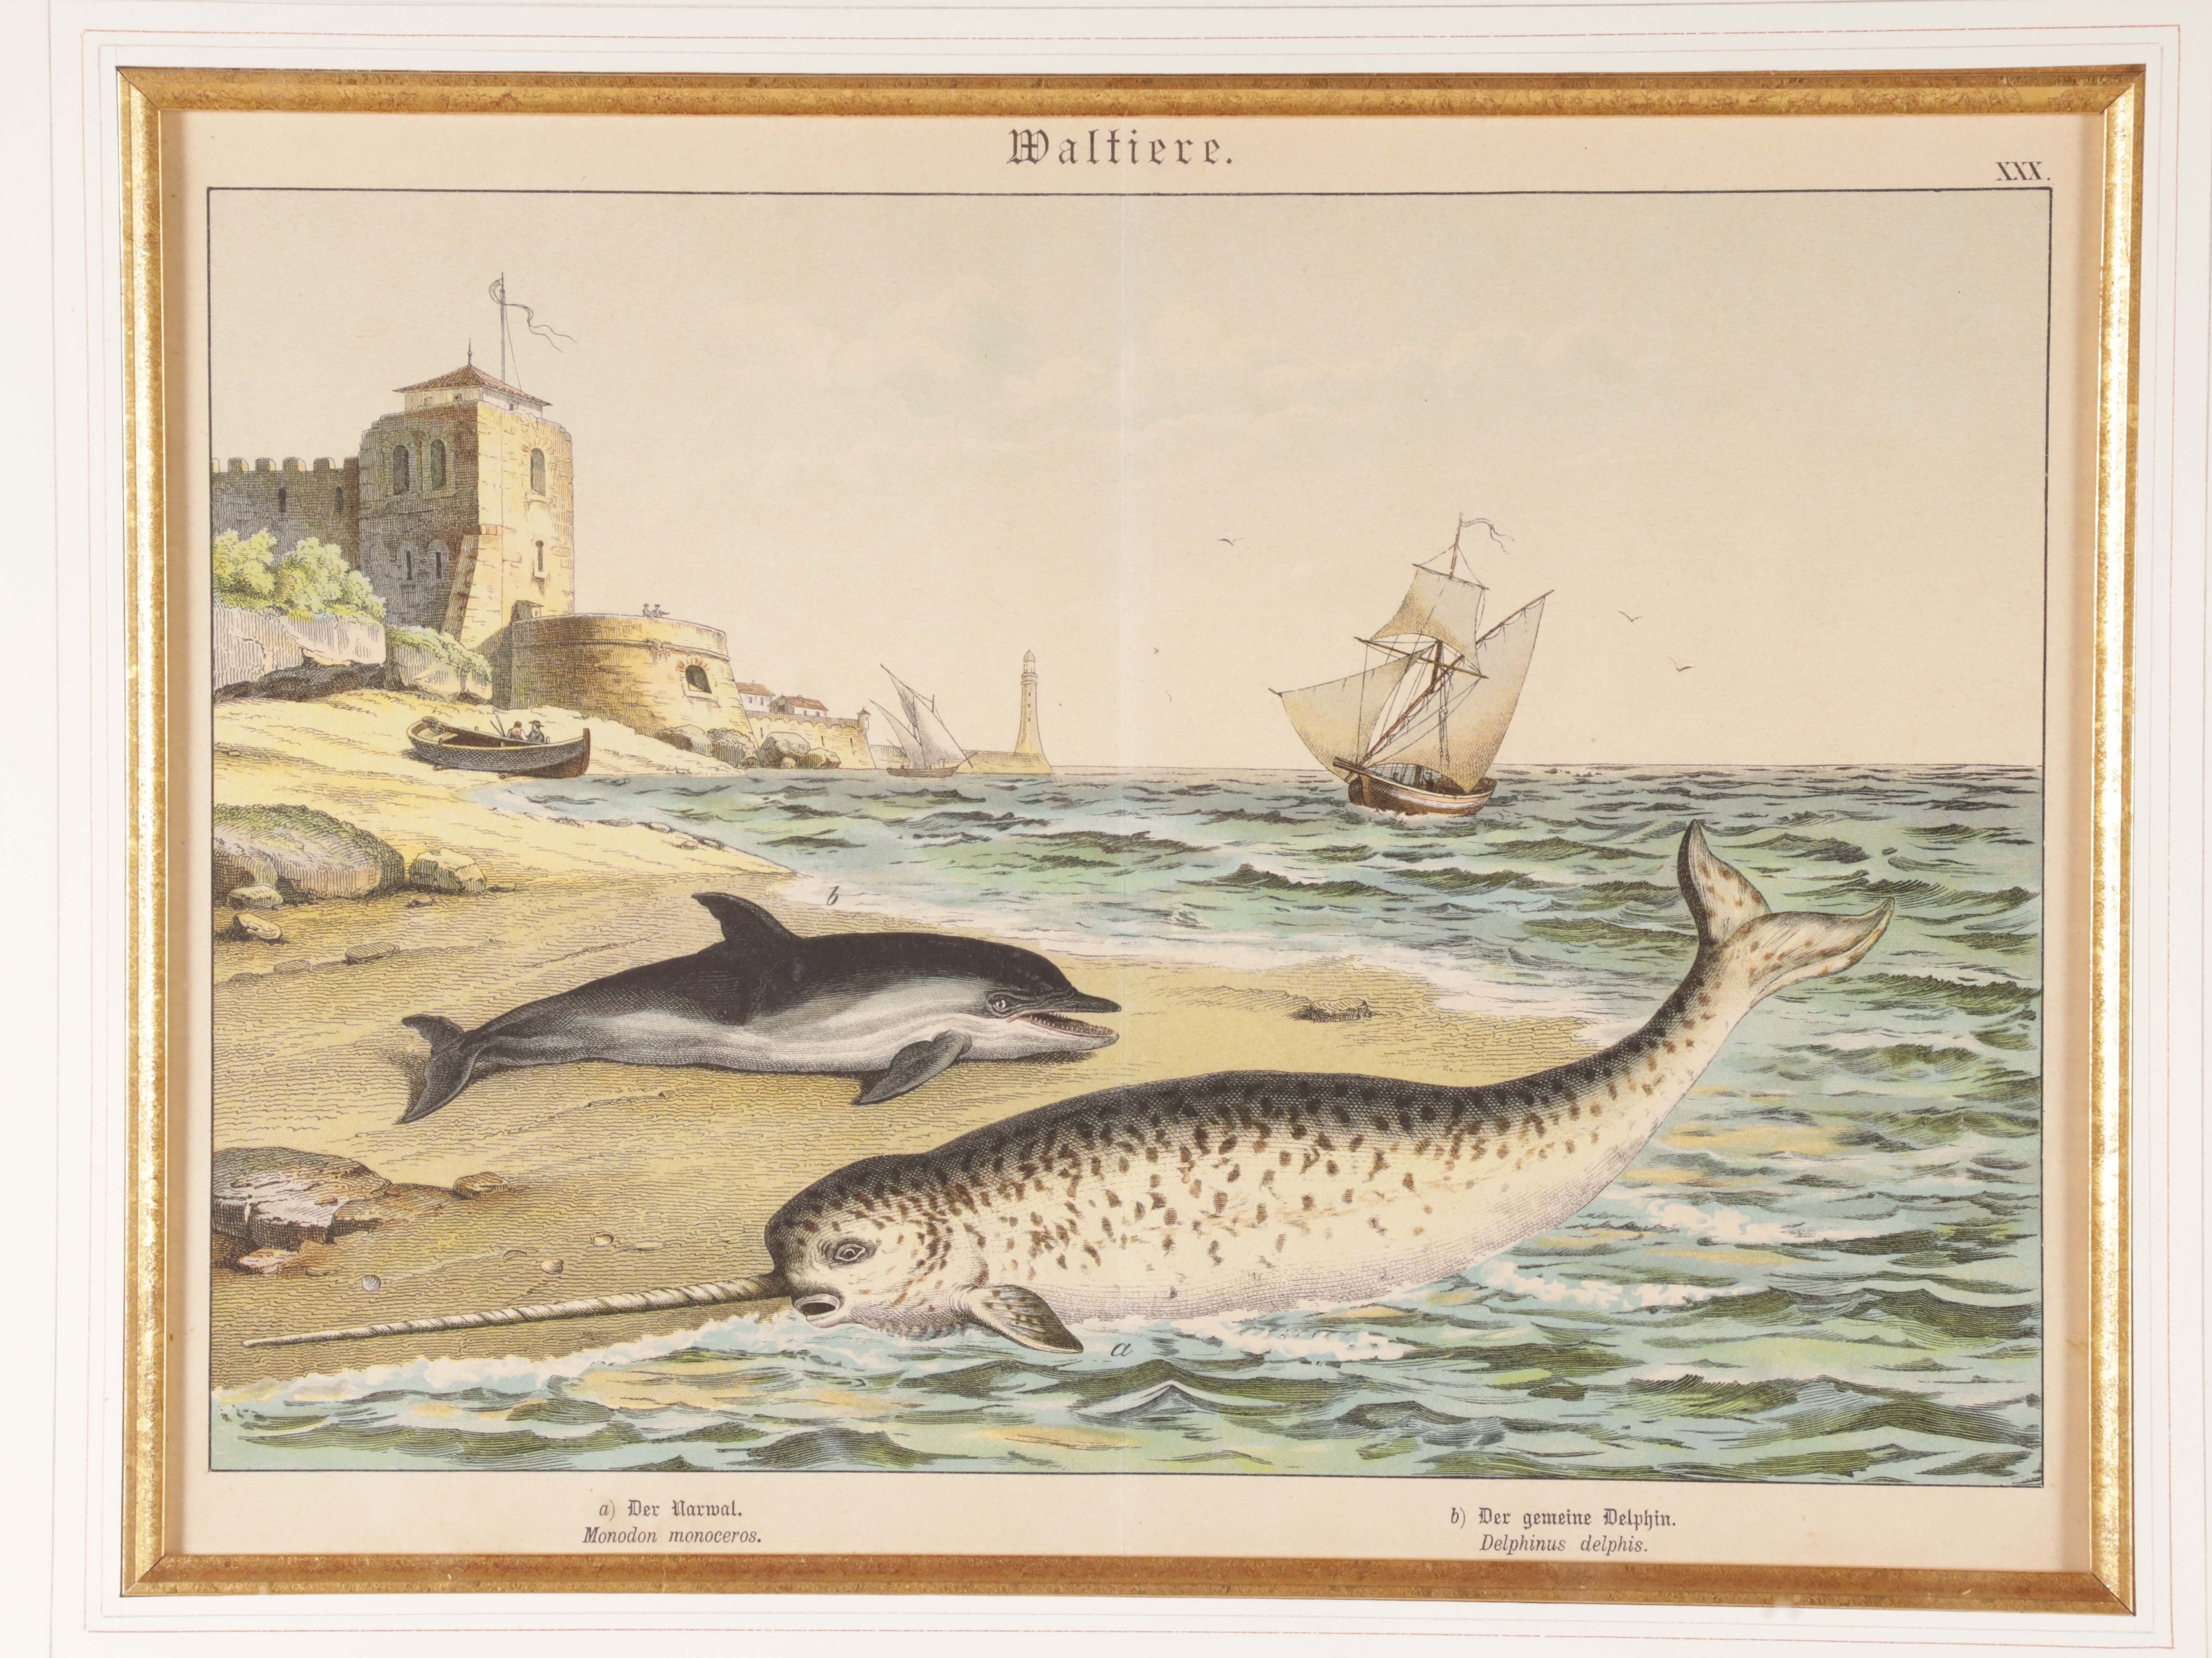 Pair of German Prints of Whales, Narwal and Porpoise, 19th Century